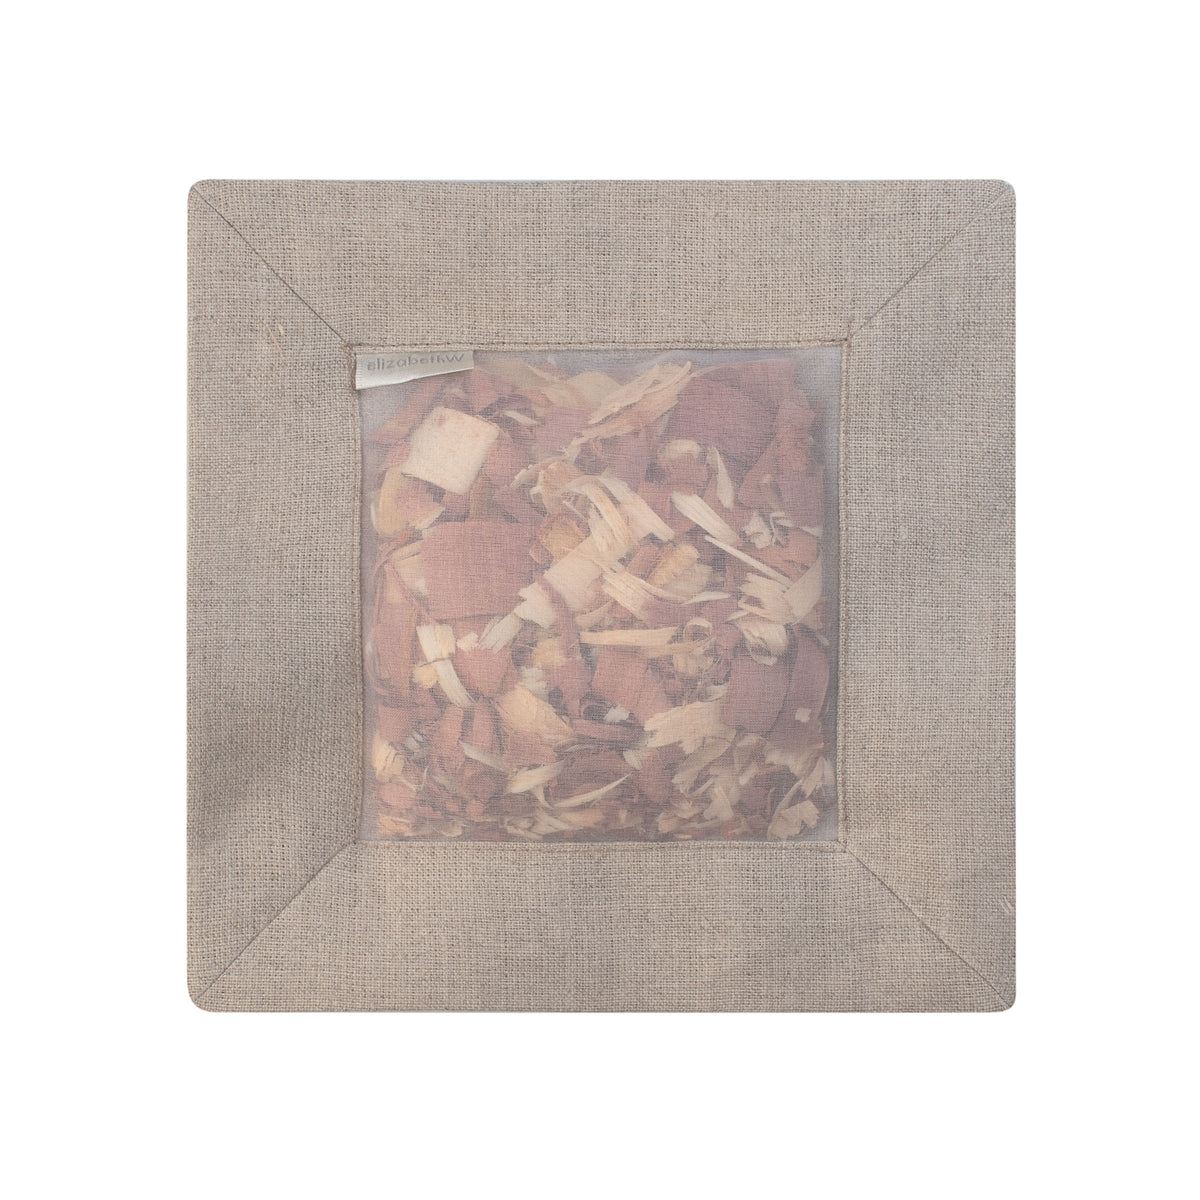 Cedar filled inside of a &quot;natural&quot; colored square sachet with a transparent screen